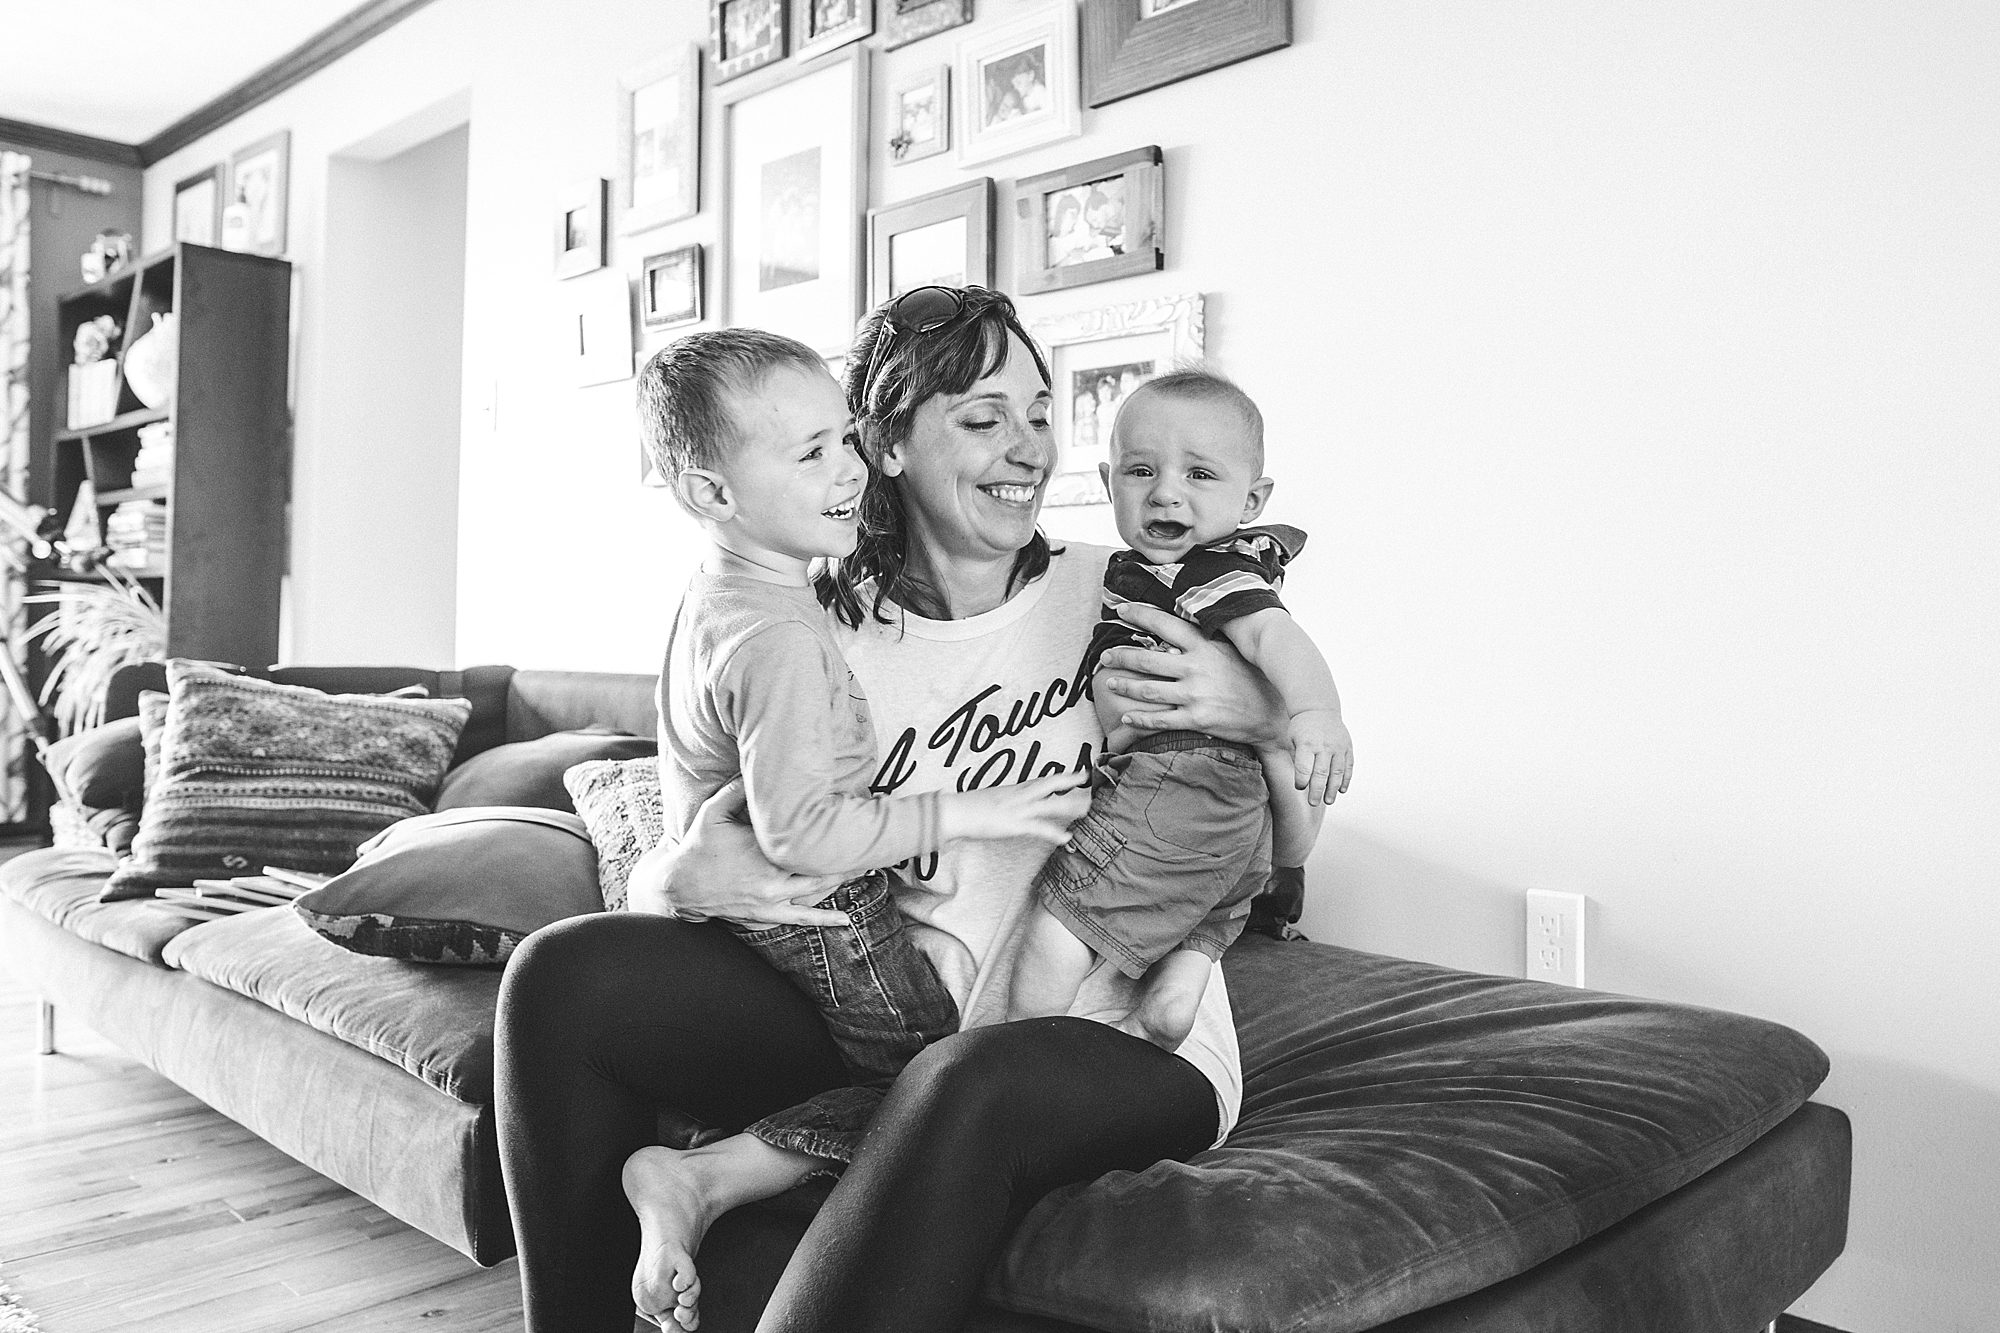 A woman sitting on a couch with two young children, smiling and embracing them.